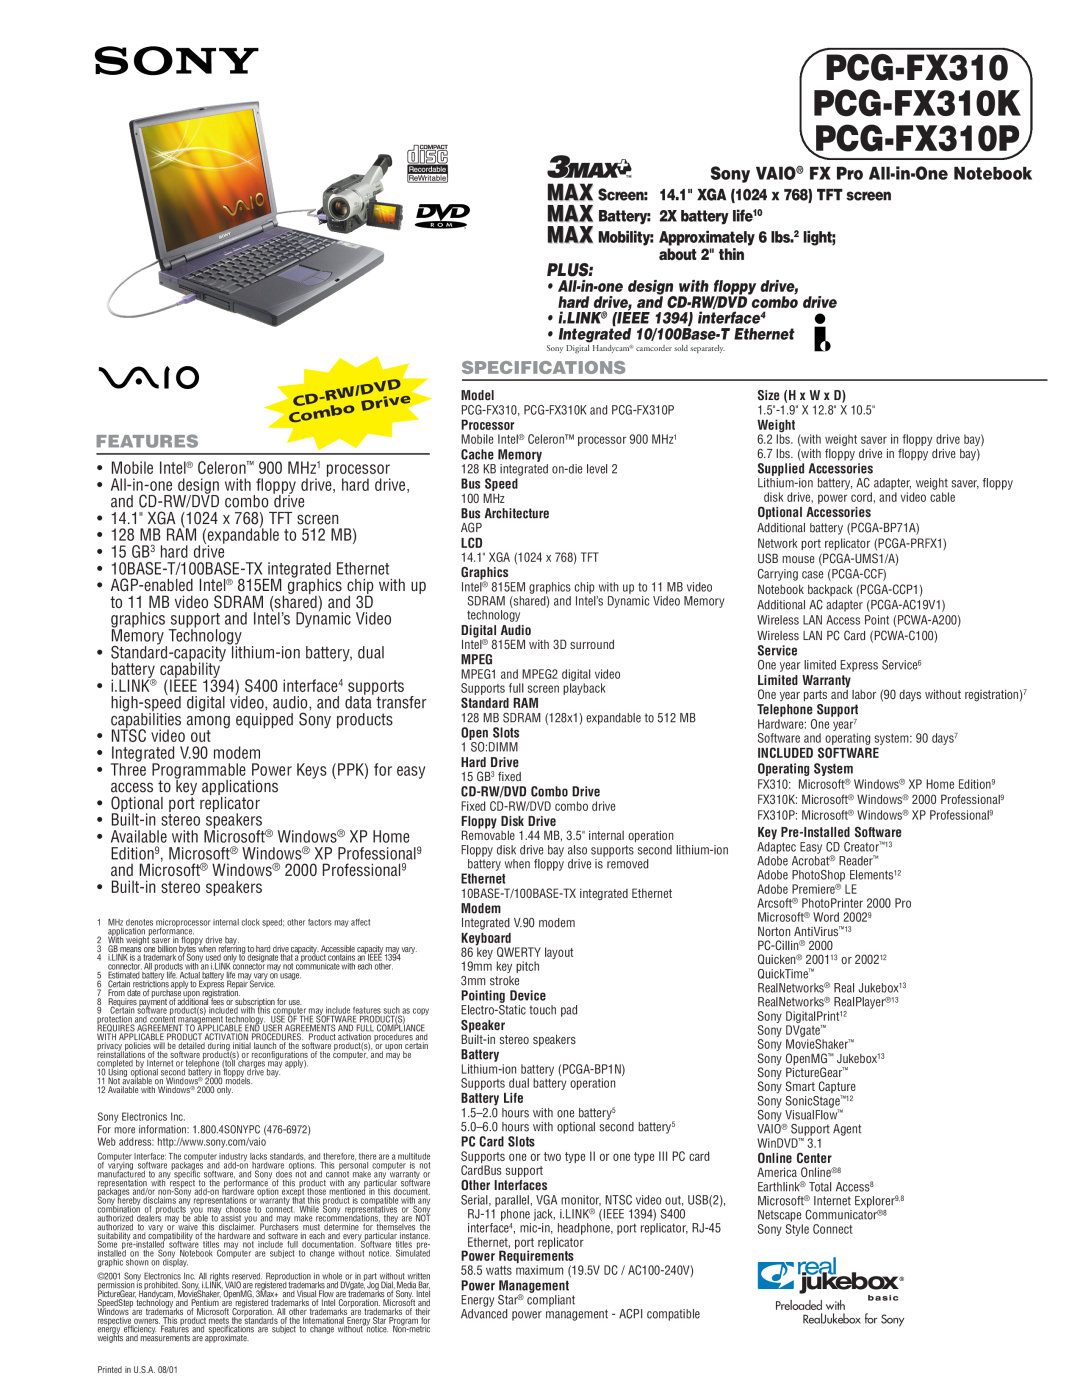 Sony PCGFX310 specifications PCG-FX310 PCG-FX310K PCG-FX310P, Features, Sony VAIO FX Pro All-in-One Notebook, Plus 